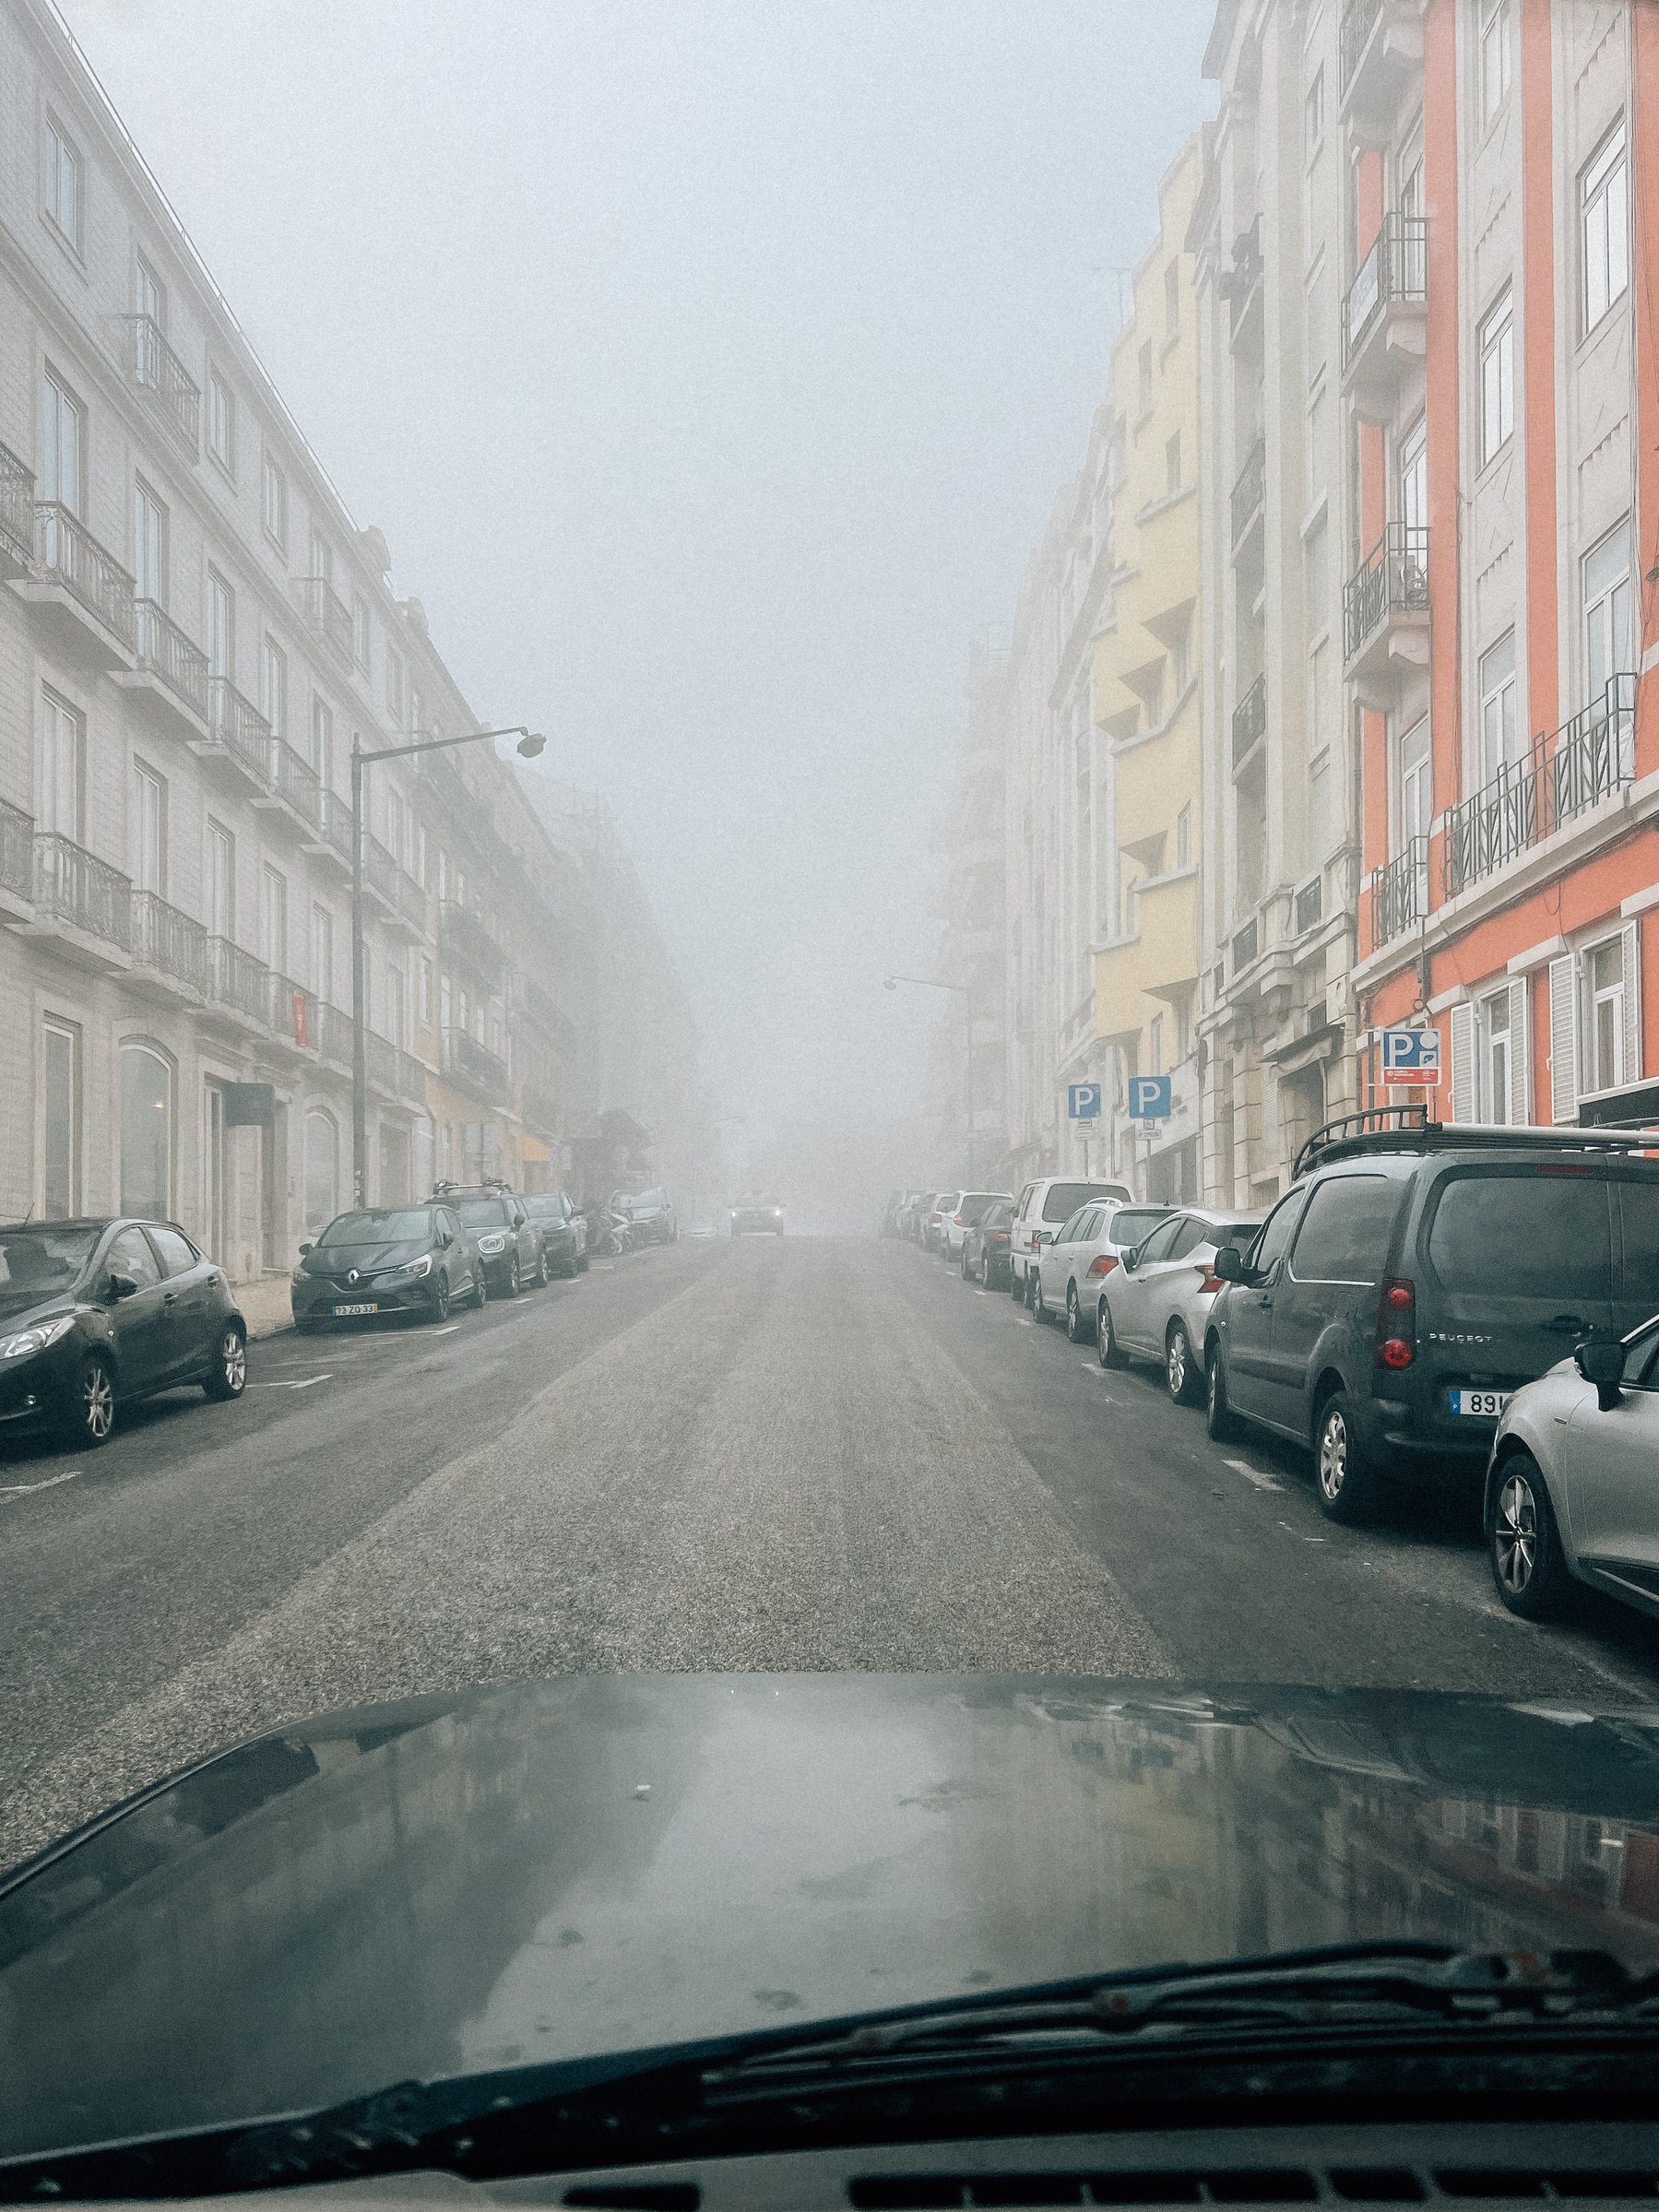 A view from inside a car showing a foggy street lined with parked cars and multistoried buildings, with visibility significantly reduced due to the dense fog.